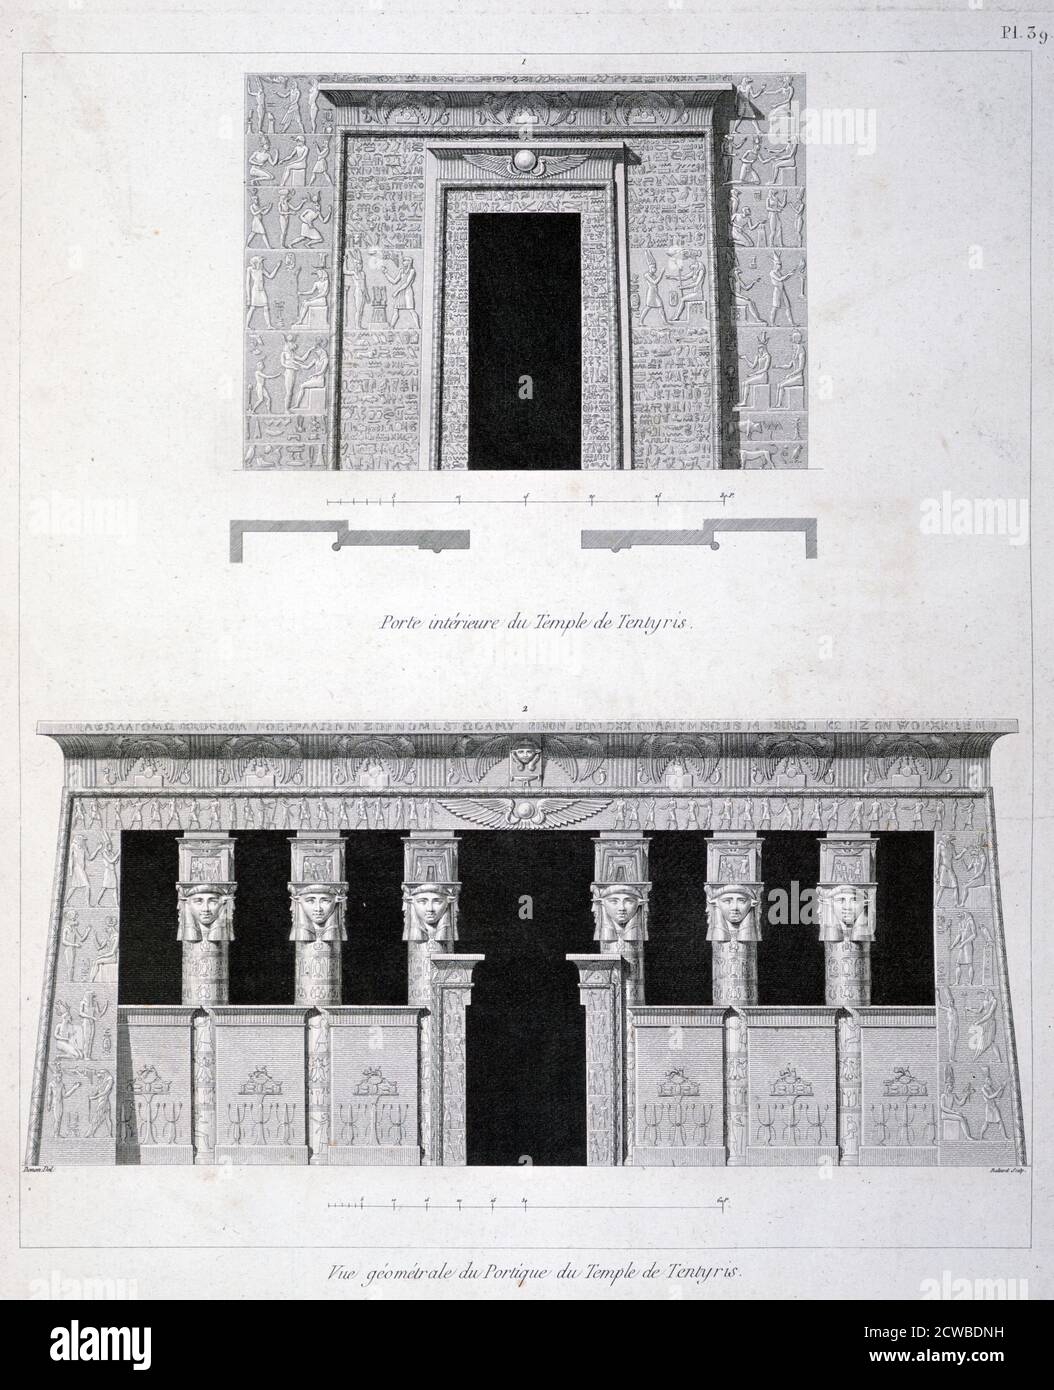 A Doorway and Gantry at the Temple of Tentyris, 19th century. Dendera Temple complex. The ancient site of Ta-ynt-netert which means 'She of the Divine Pillar', or Tentyra which is Greek for Dendera. By the French artist Vivant Denon. Stock Photo